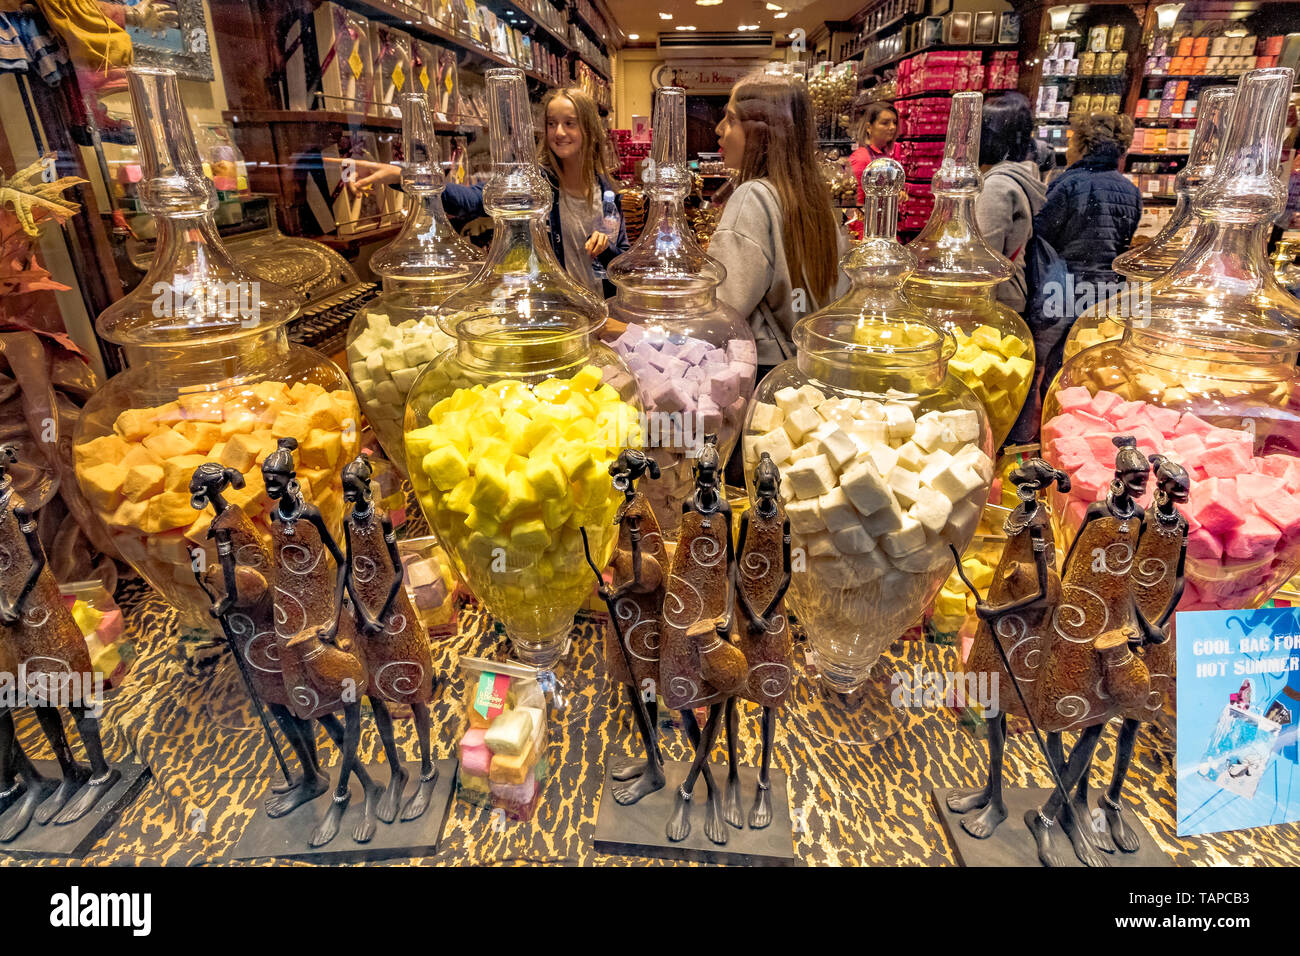 Luxury chocolates in a window display at  La Belgique Gourmande Les Galeries Royales Saint-Hubert , an elegant glazed shopping arcade in Brussels Stock Photo